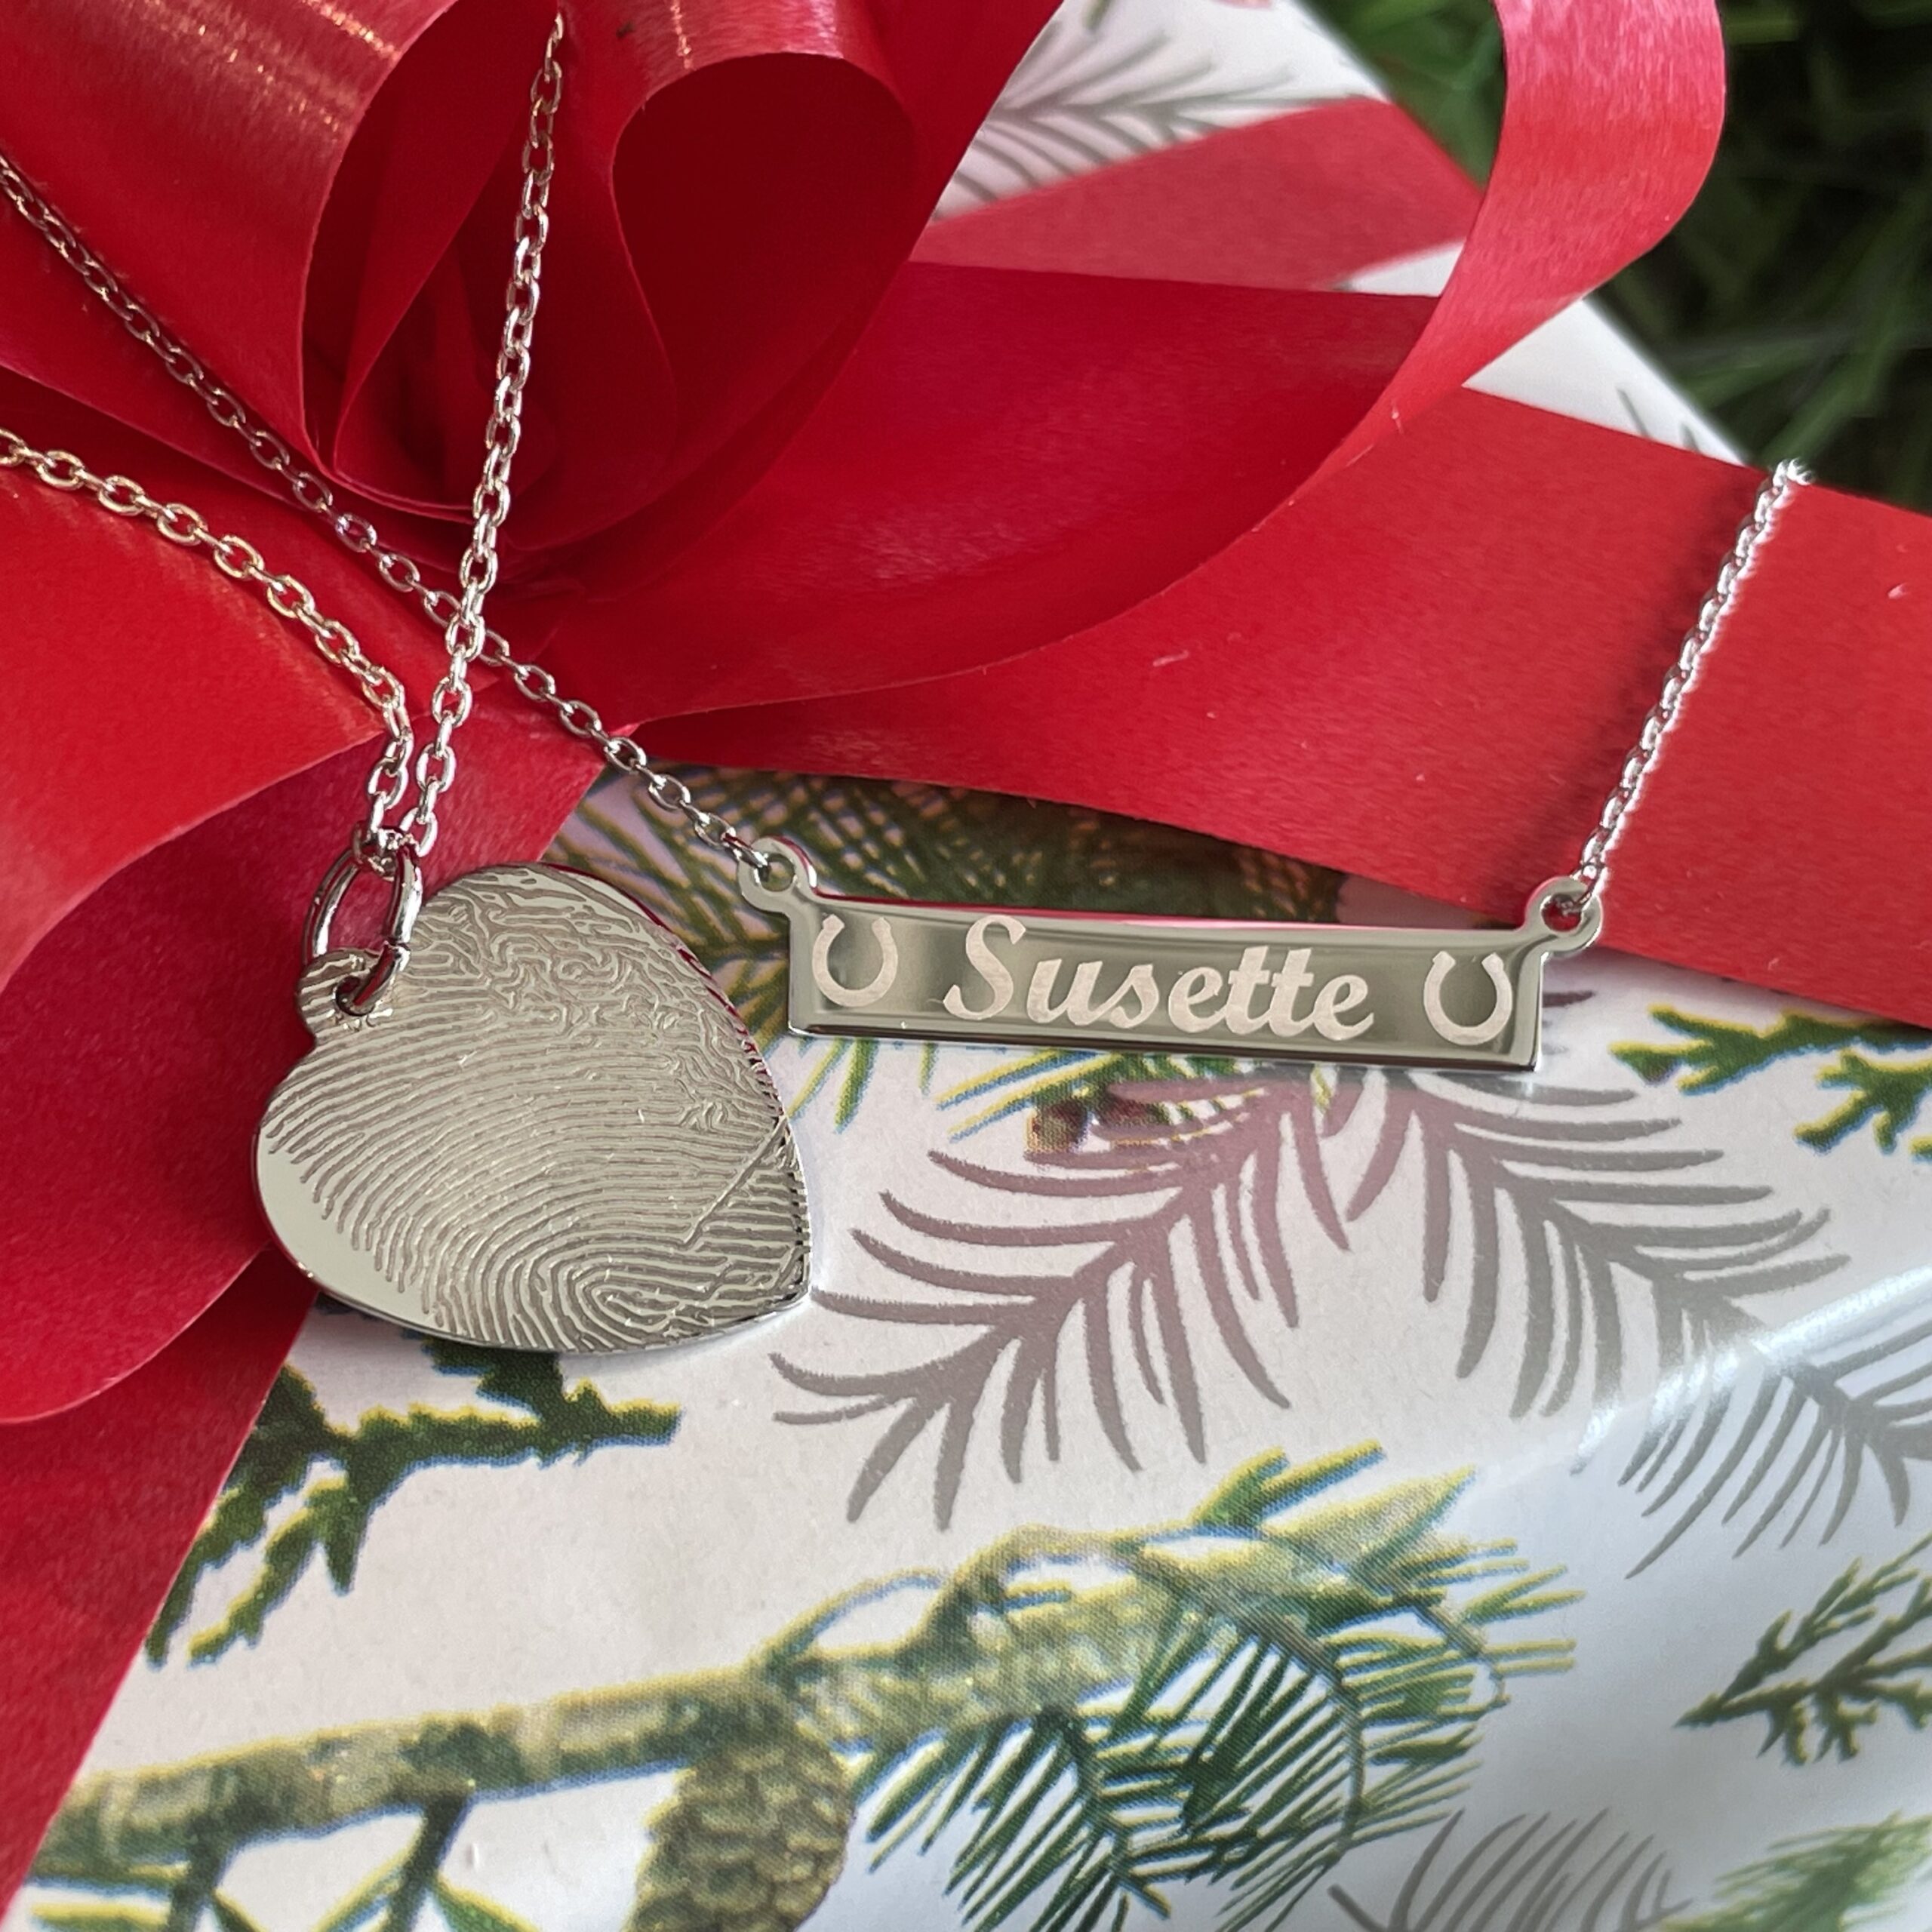 Silver heart pendant with fingerprint pattern and personalized Susette name plat necklace a top a wrapped present